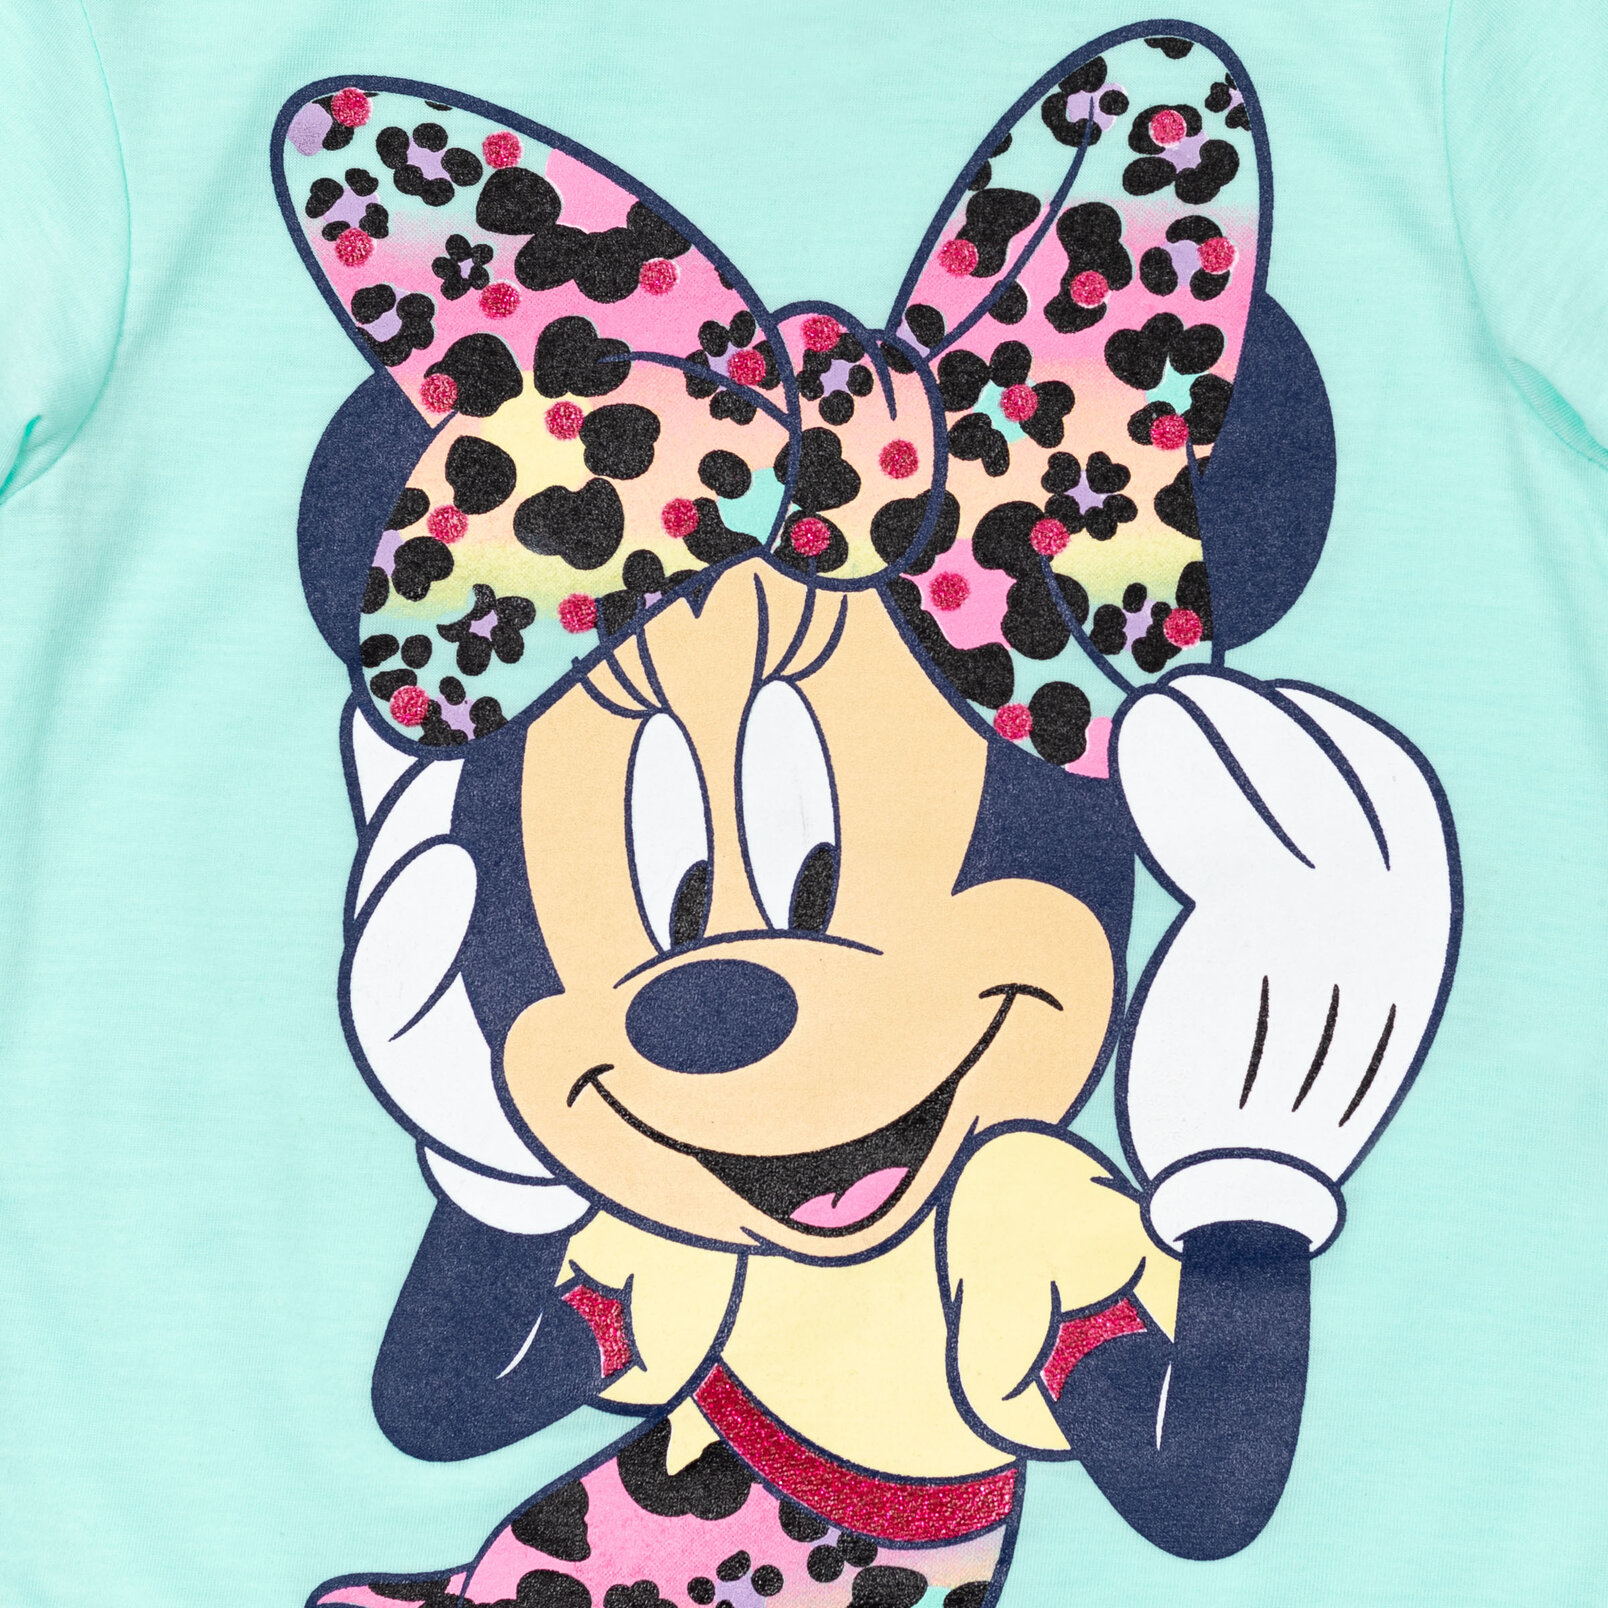 Disney Minnie Mouse Little Girls T-Shirt and Leggings Outfit Set Infant to Big Kid - image 5 of 5